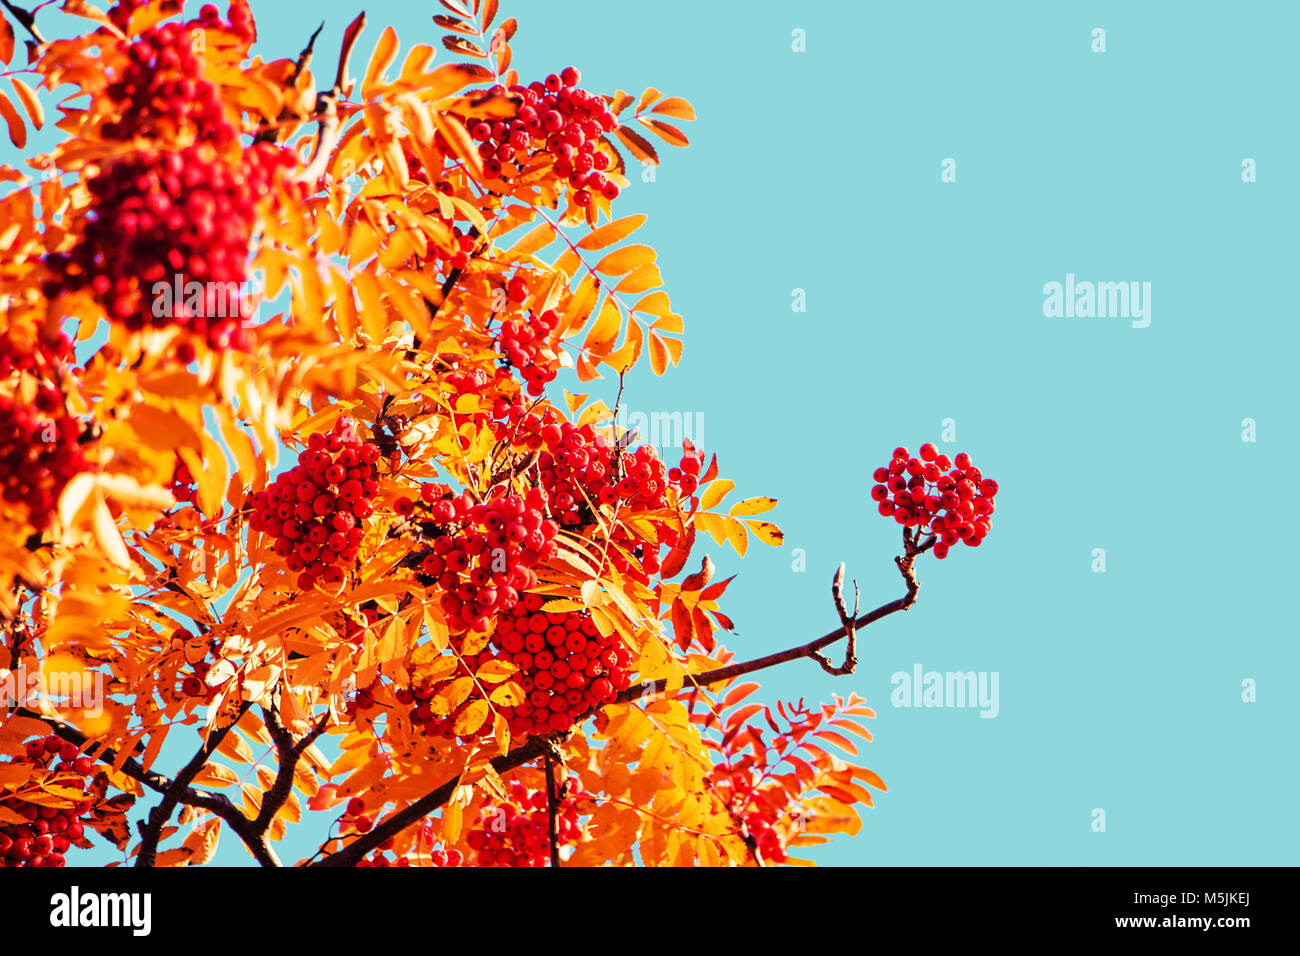 Red berries and yellow leaves on a rowan tree in october. Sunny autumn afternoon. Stock Photo